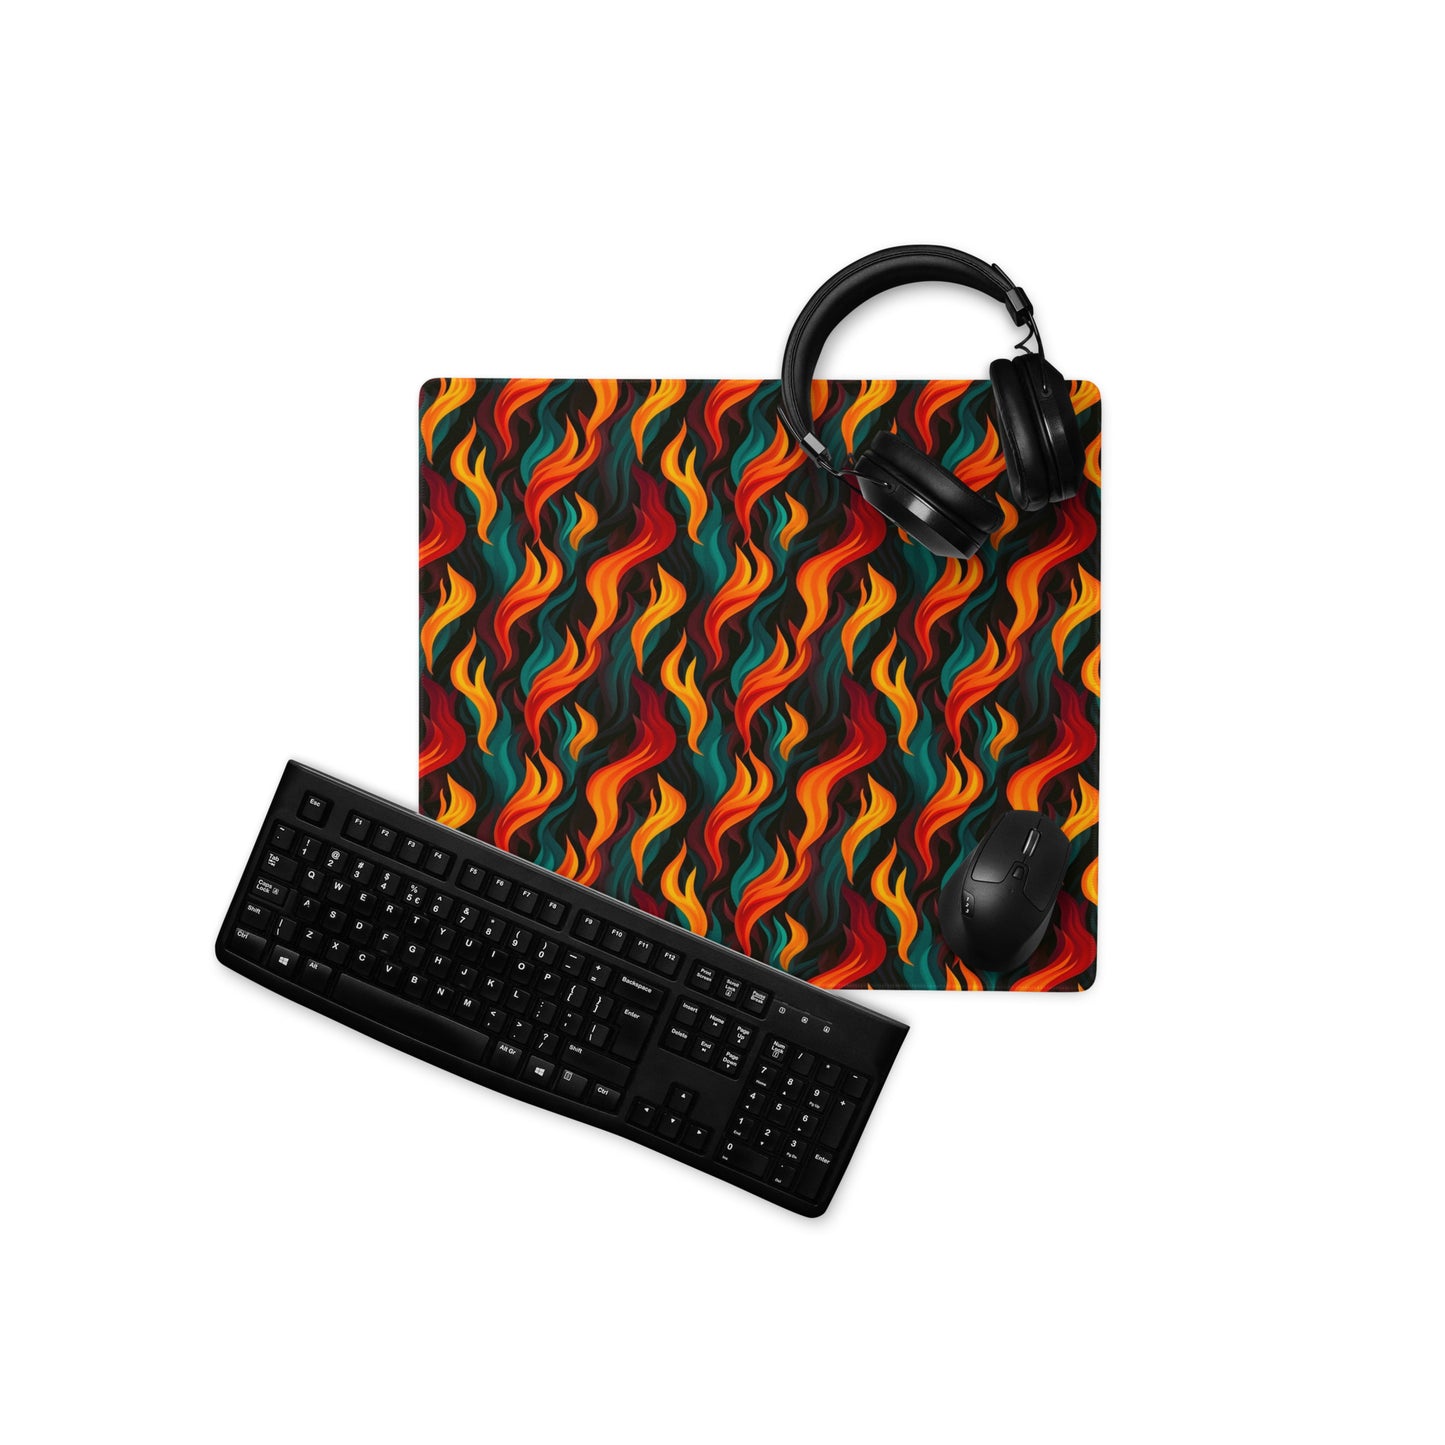 A 36" x 18" desk pad with a wavy flame pattern on it displayed with a keyboard, headphones and a mouse. Red and Teal in color.